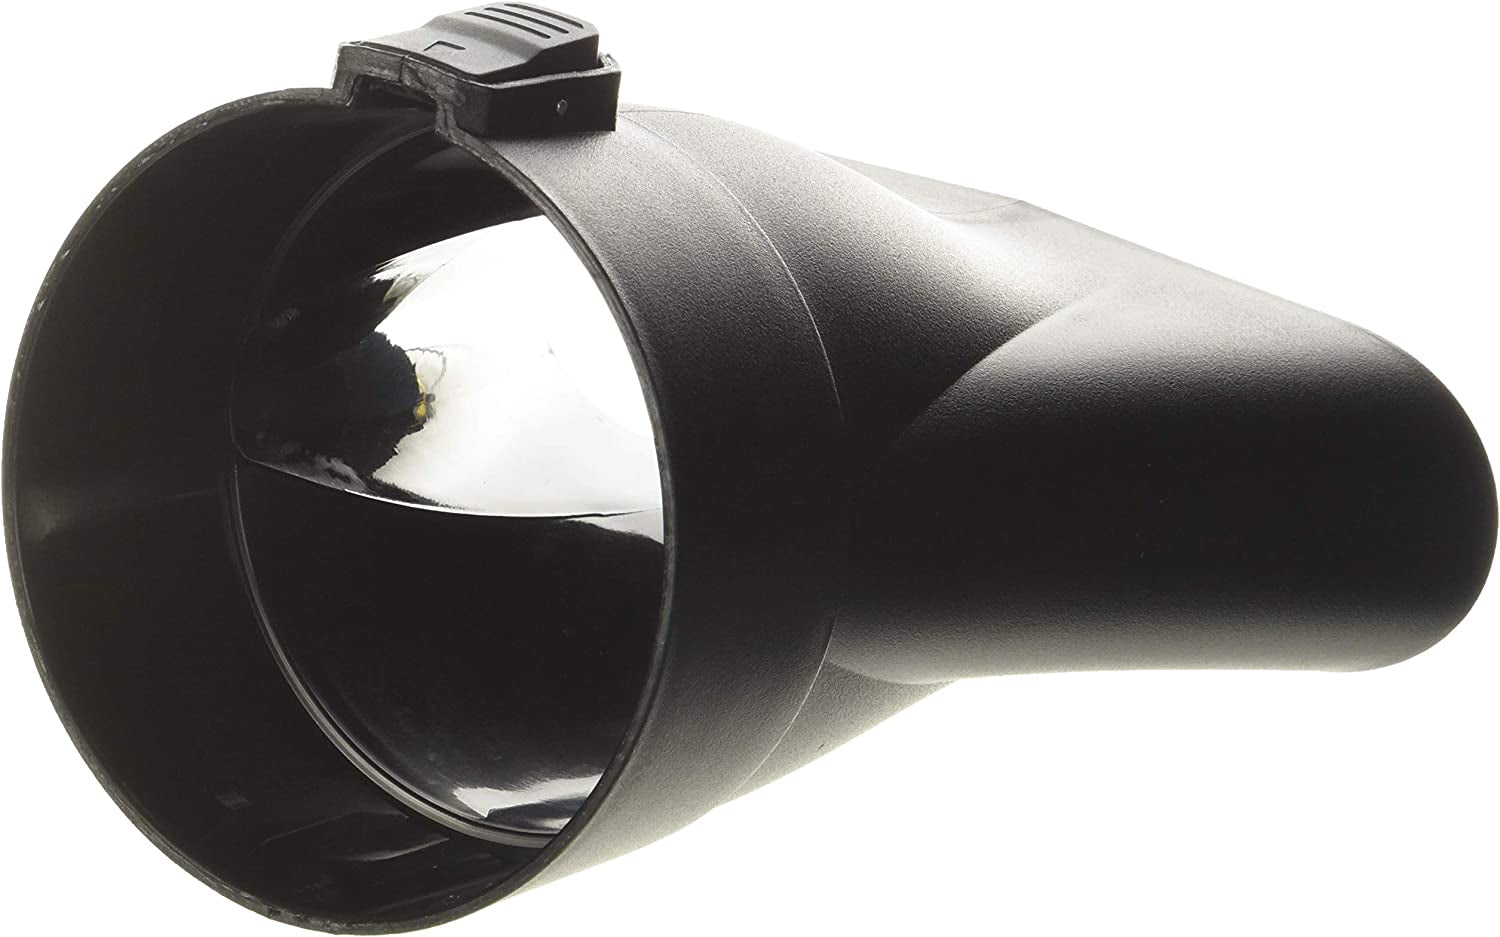 EGO Power+, EGO Power+ AN5300 Blower Flat Nozzle for EGO 530 CFM Blower LB5300/LB5302